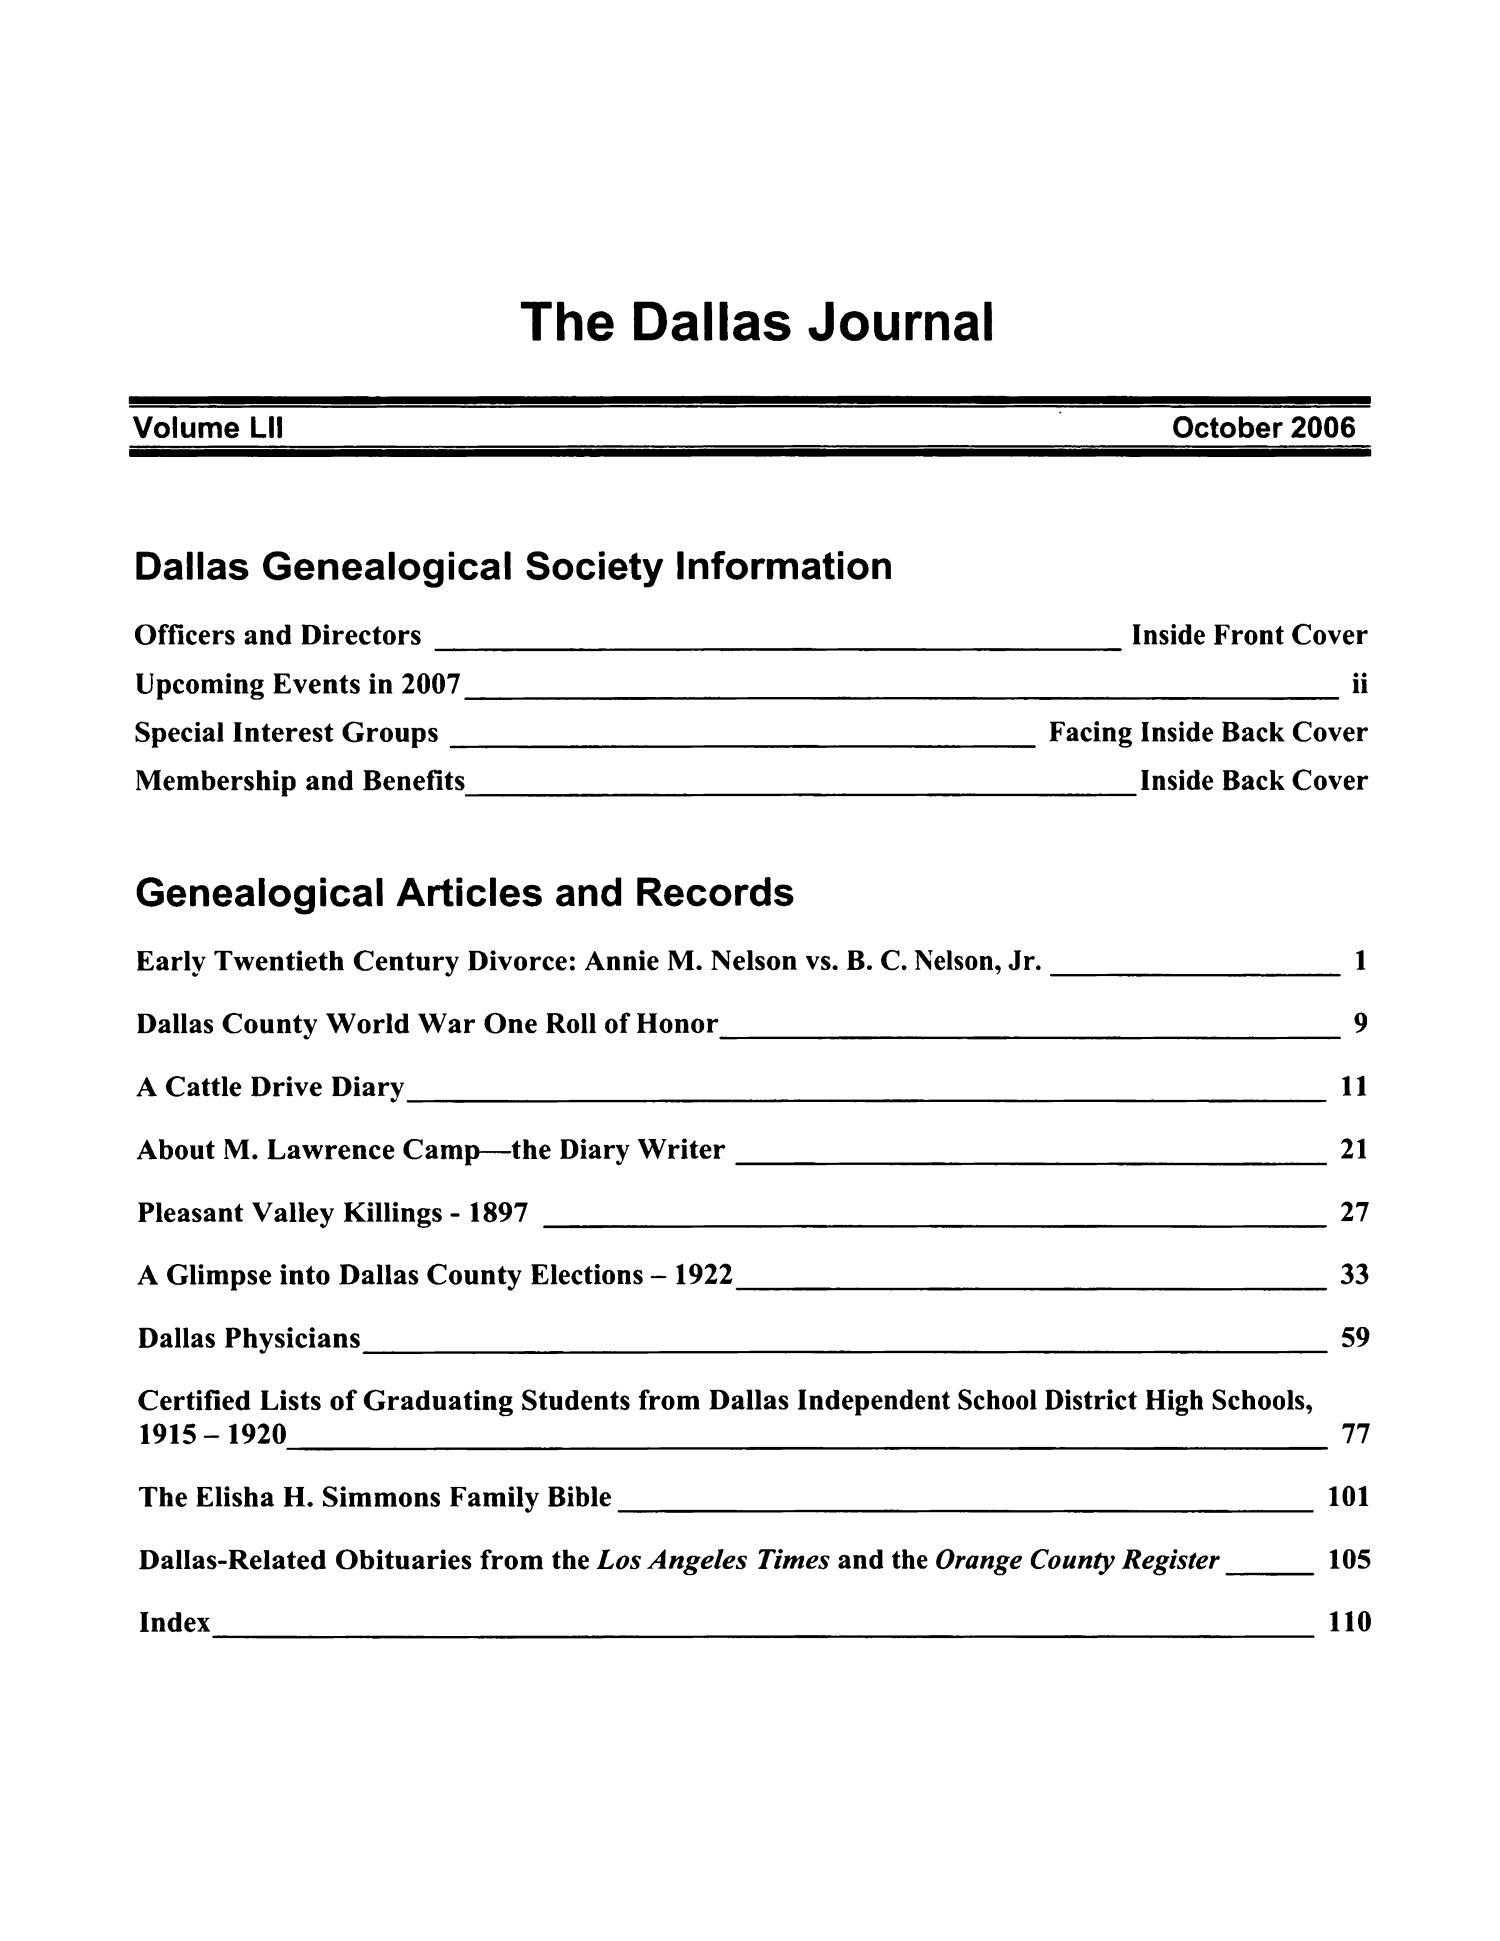 The Dallas Journal, Volume 51, 2006
                                                
                                                    Title Page
                                                